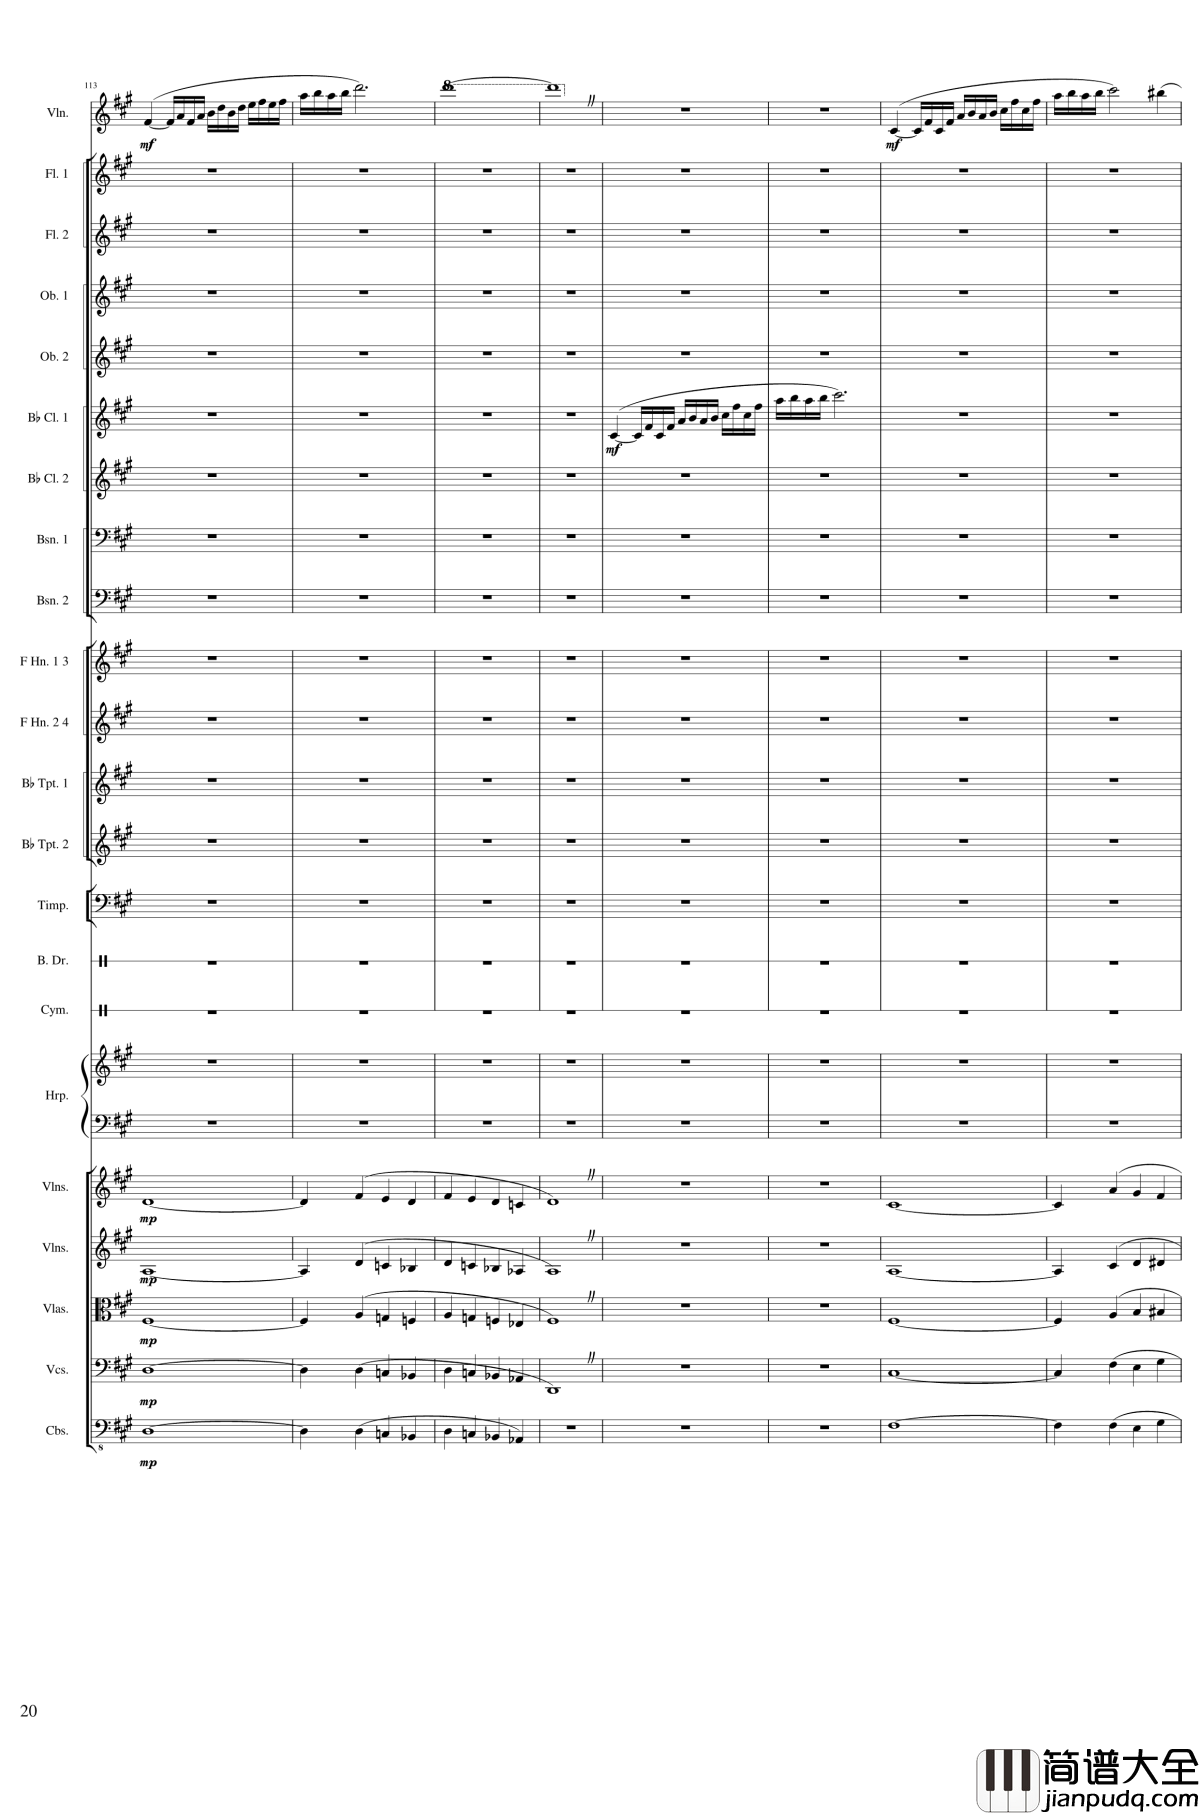 Capricorn_Concerto_for_Violin_and_Orchestra,_Op.114钢琴谱_一个球